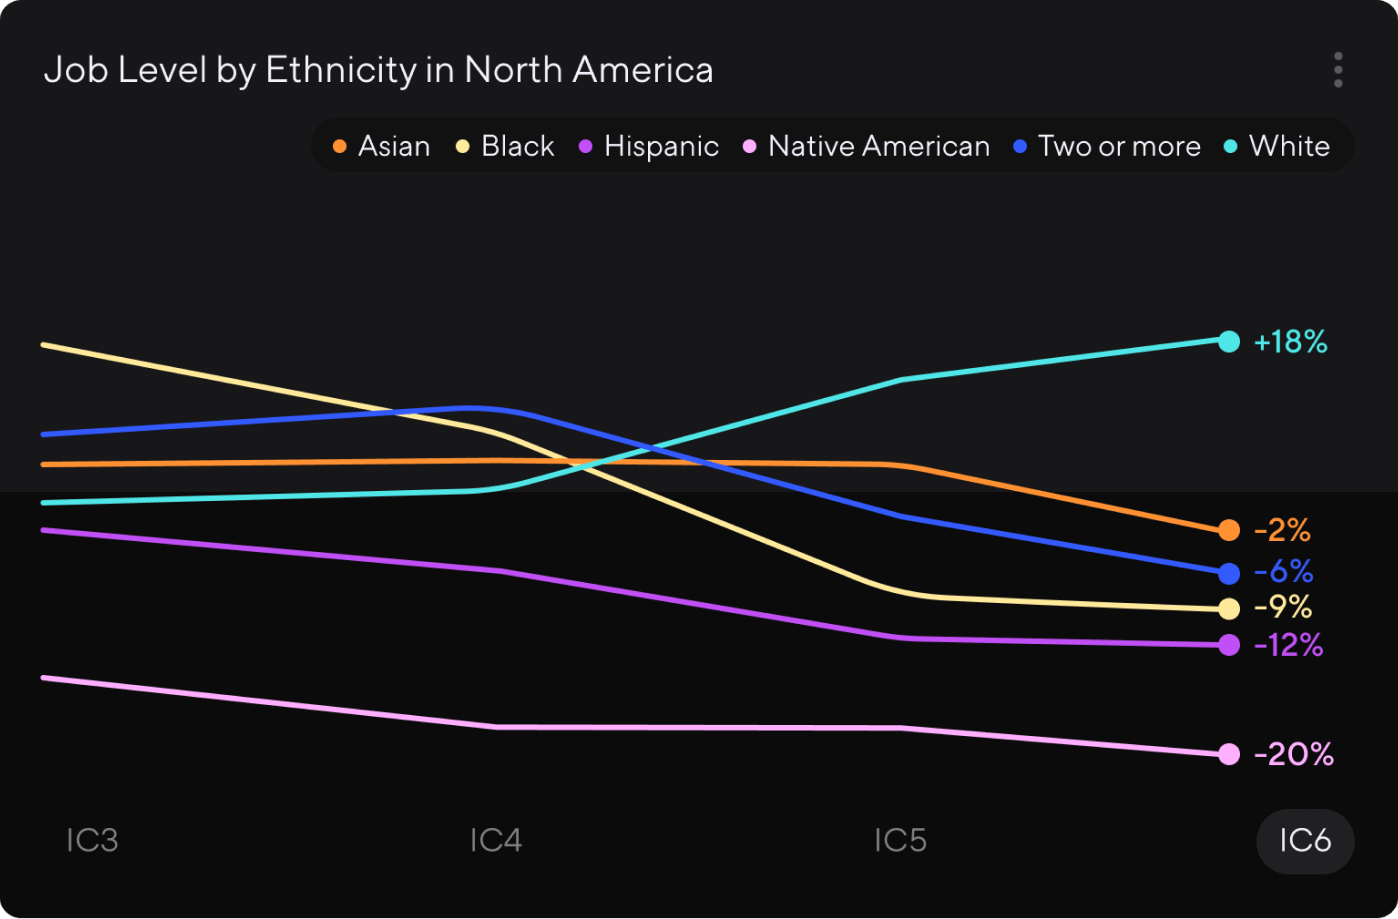 Line graph titled Job Level by Ethnicity in North America. The x-axis spans IC3 through IC6. In IC6, White, represented by teal, is plus 18%; Asian, in orange, is minus 2%; Two or more, in blue, is minus 6%; Black, in yellow, is minus 9%; Hispanic, in purple, is minus 12%; and Native American, in pink, is minus 20%.